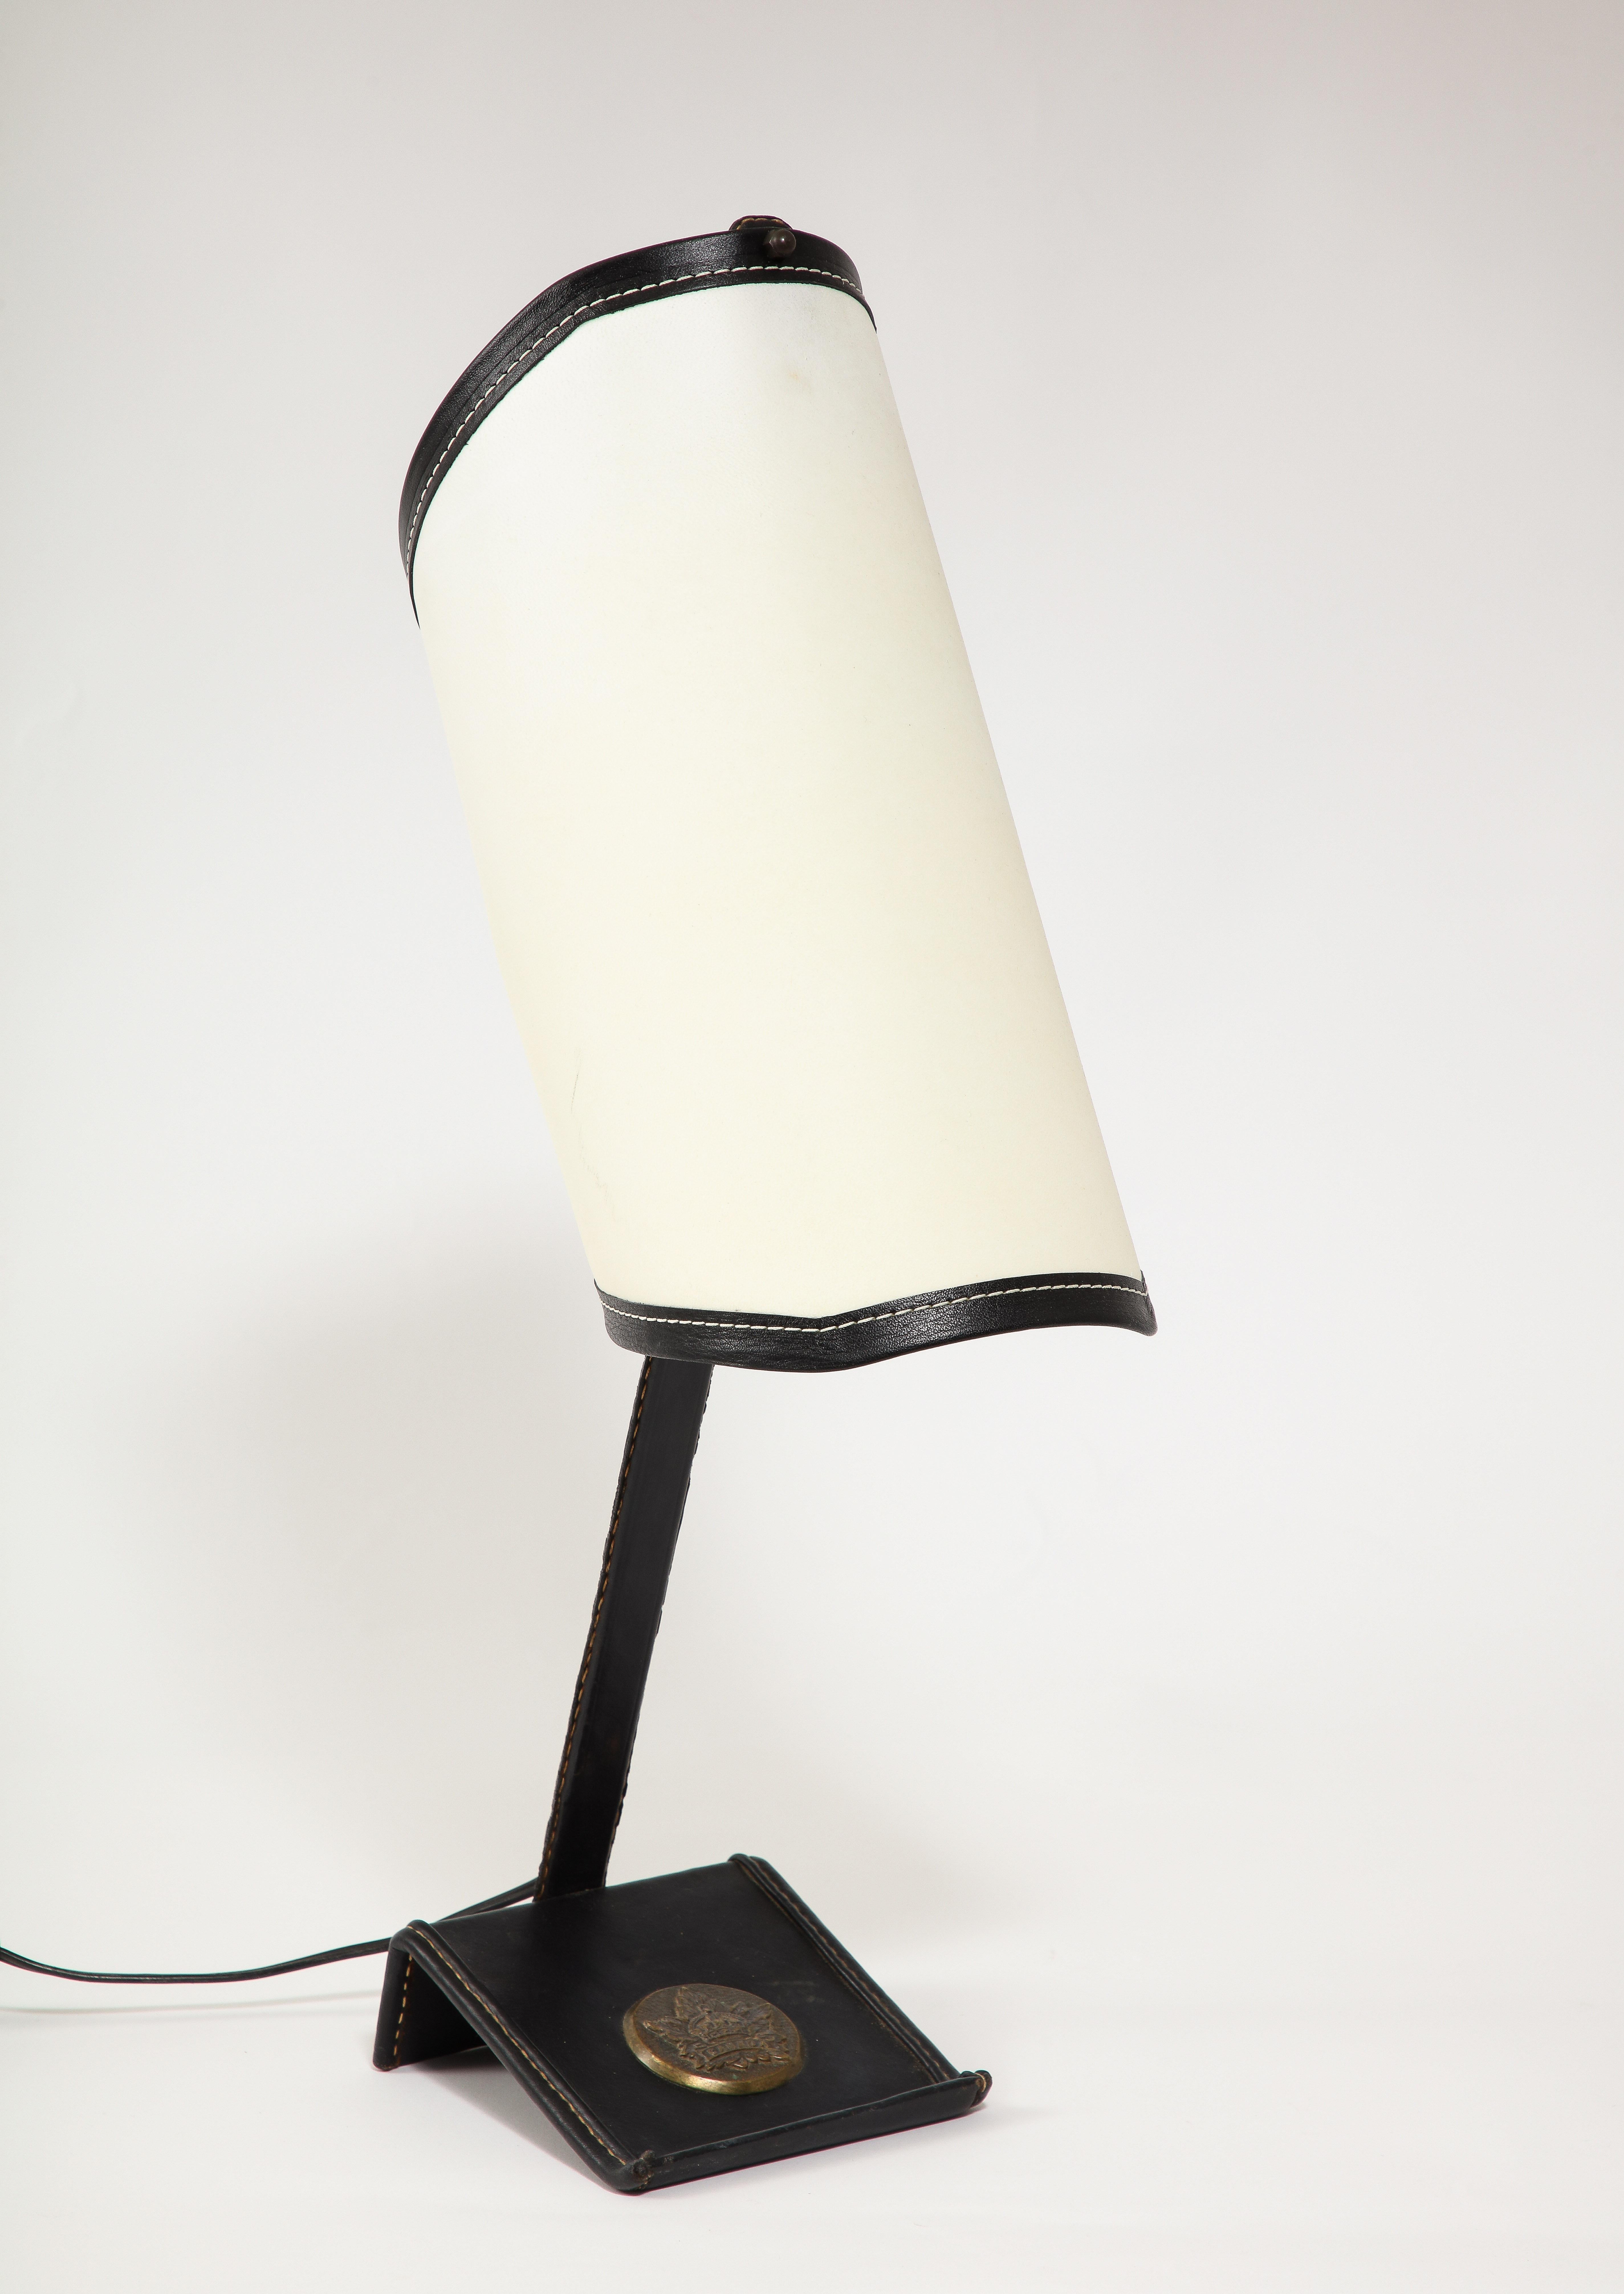 Jacques Adnet Curved Desk Lamp With Black Leather Trim, France 1950's For Sale 5